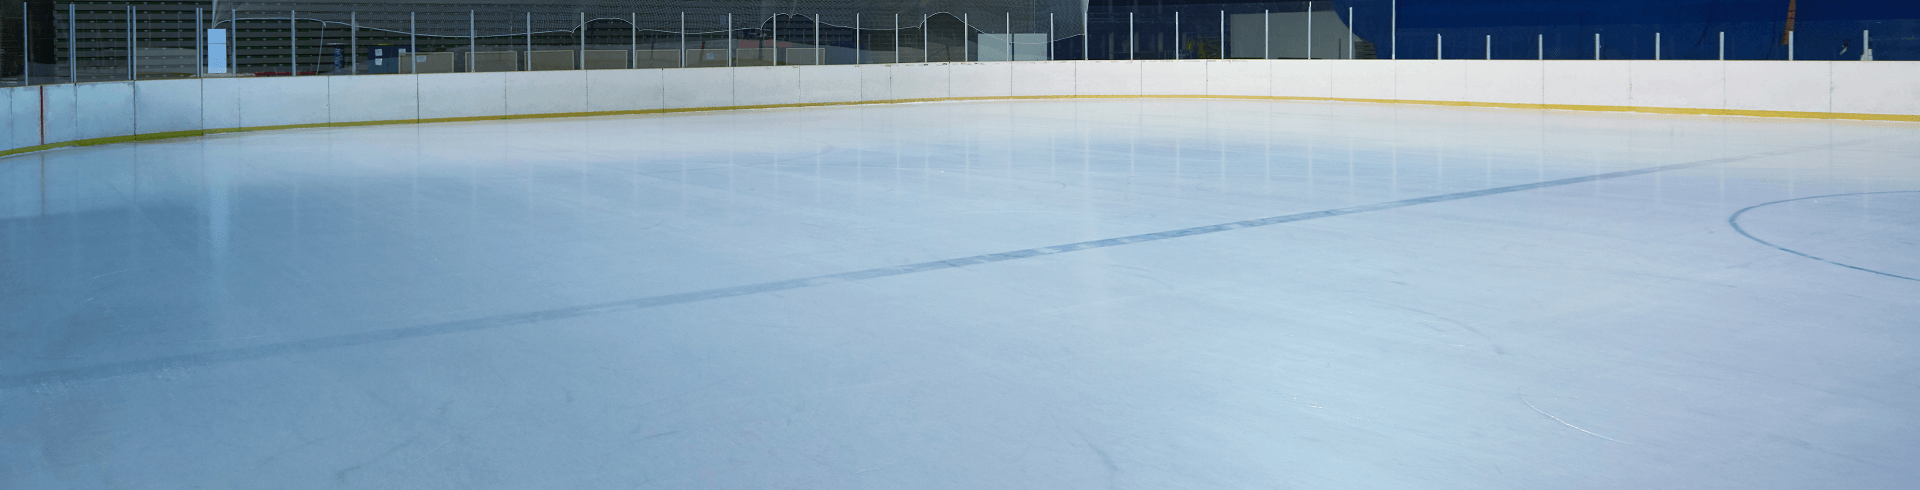 Synthetic Ice Rinks for Sale | Where to buy Synthetic Ice?